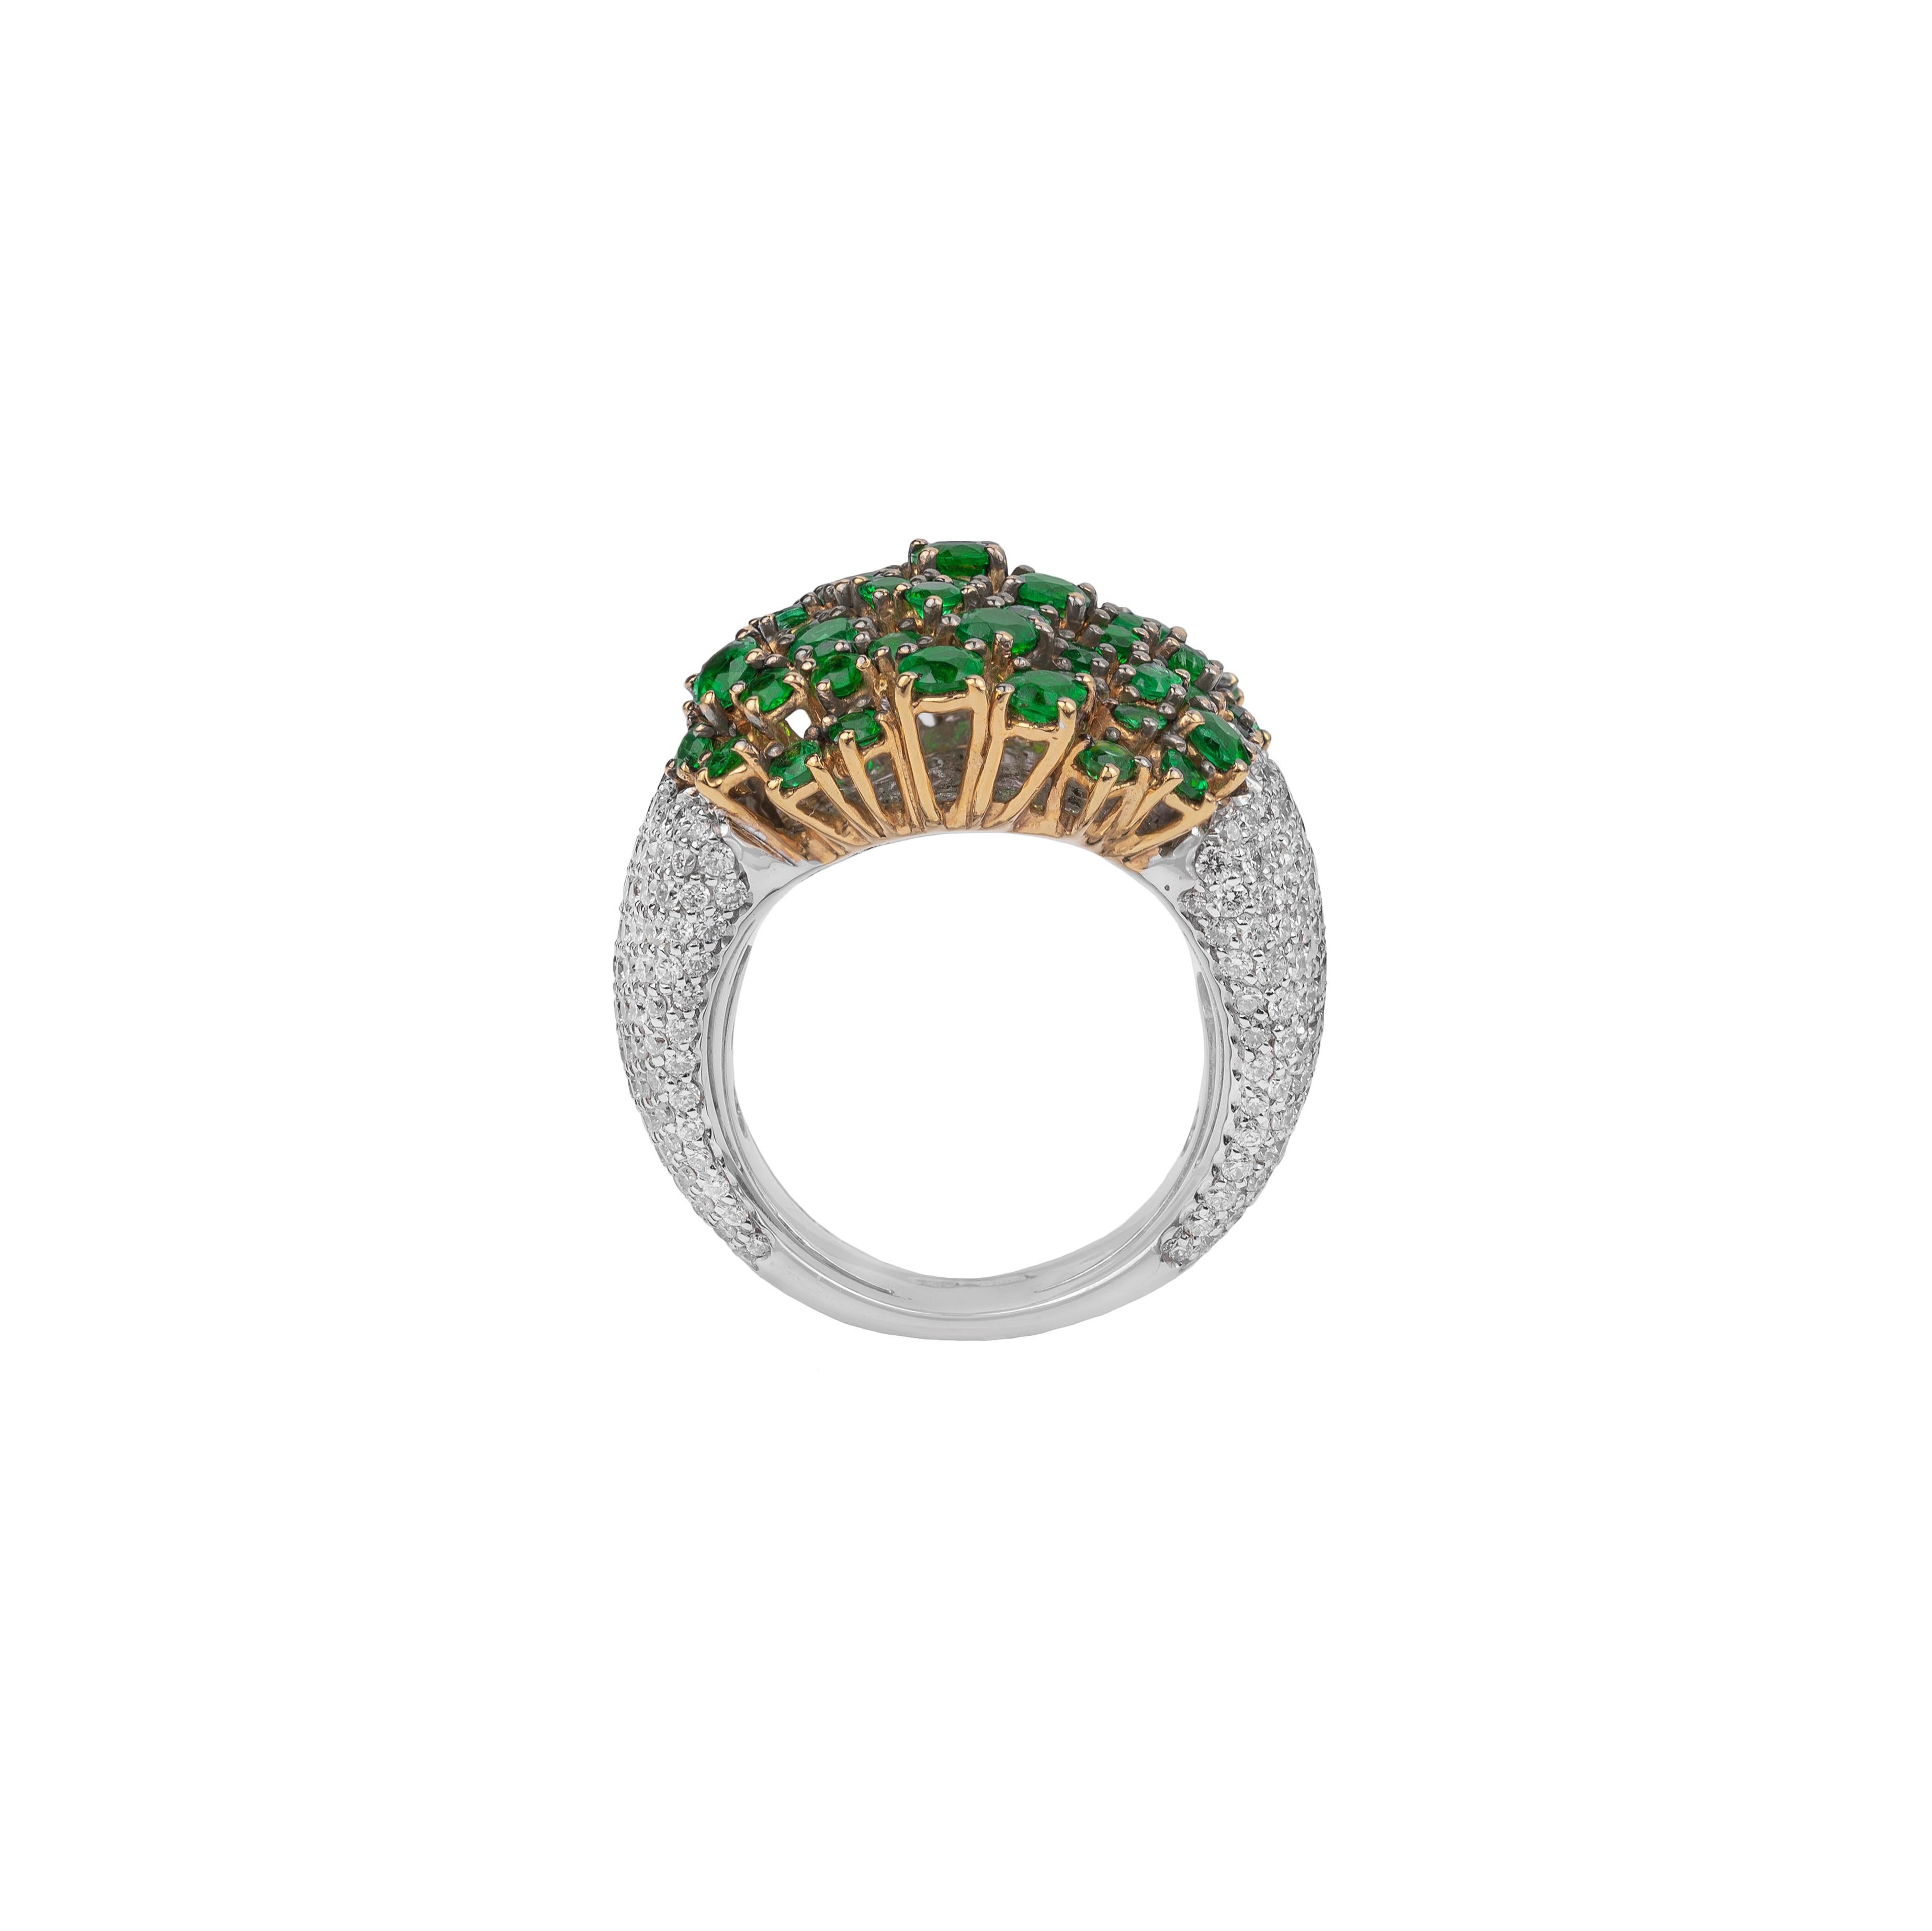 For Sale:  18k White Gold, Emeralds, and Diamonds Ring 2